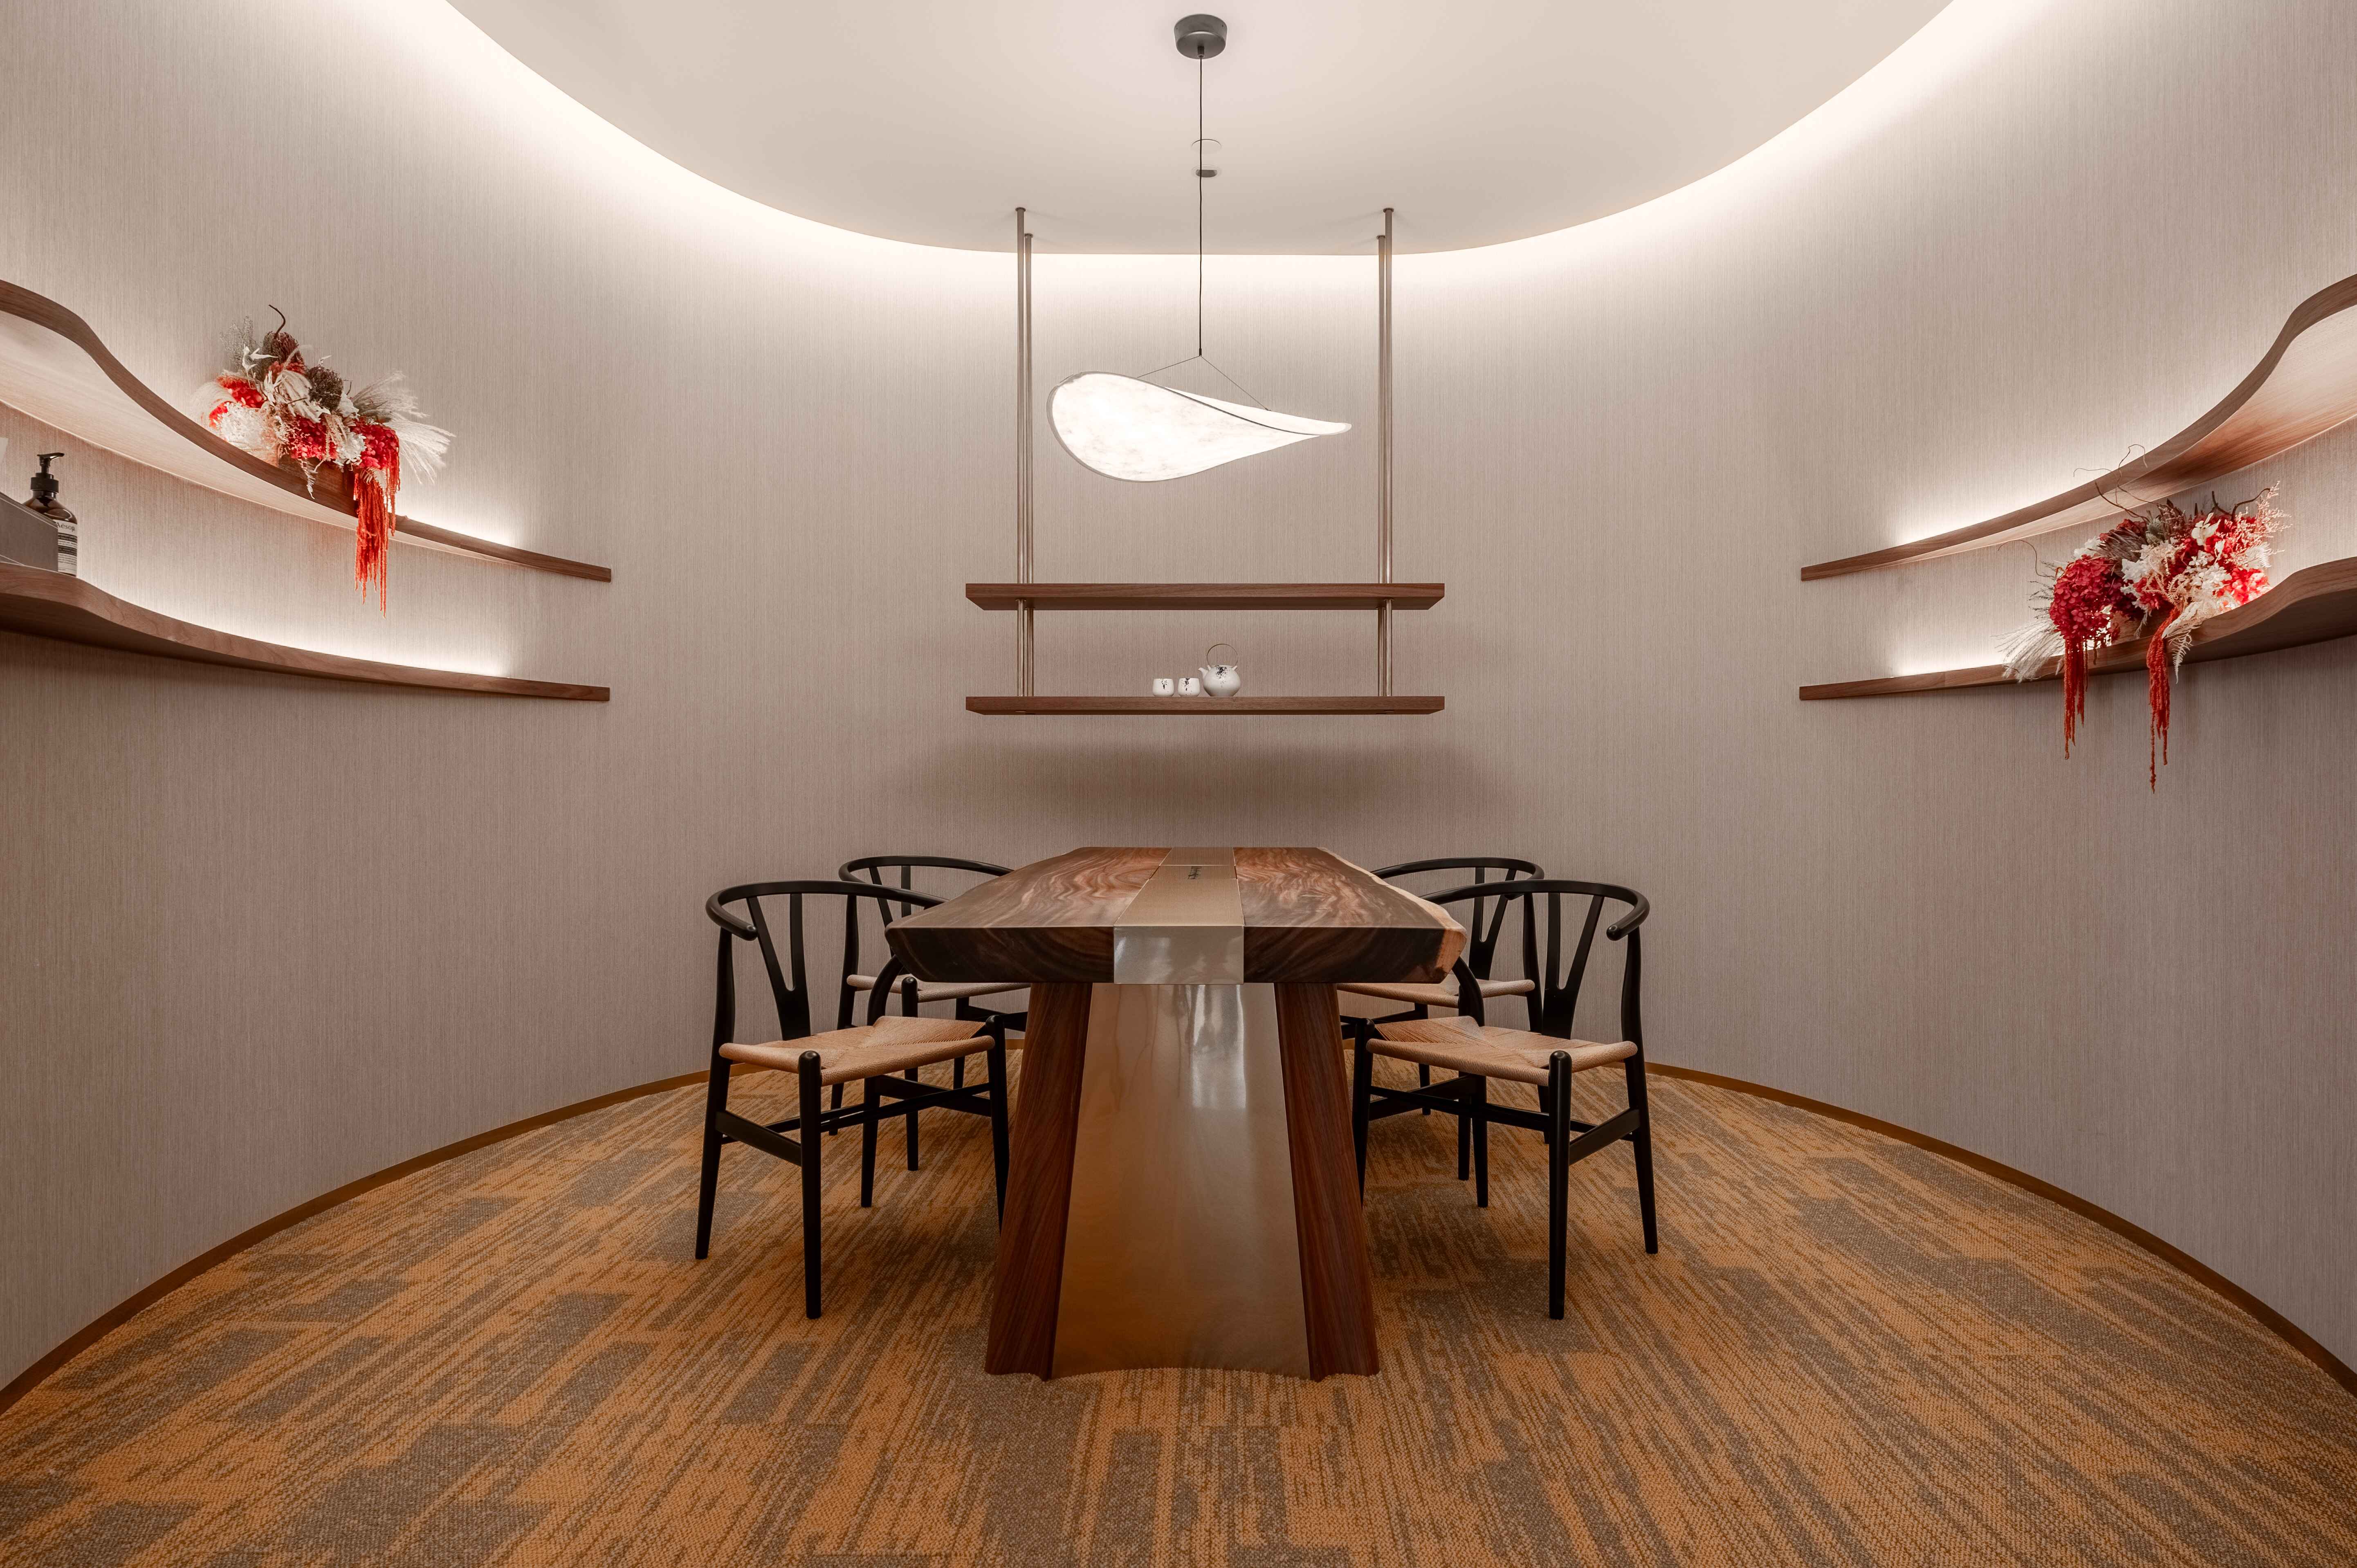 A meeting room in VP Bank's Singapore office designed like a tea room.